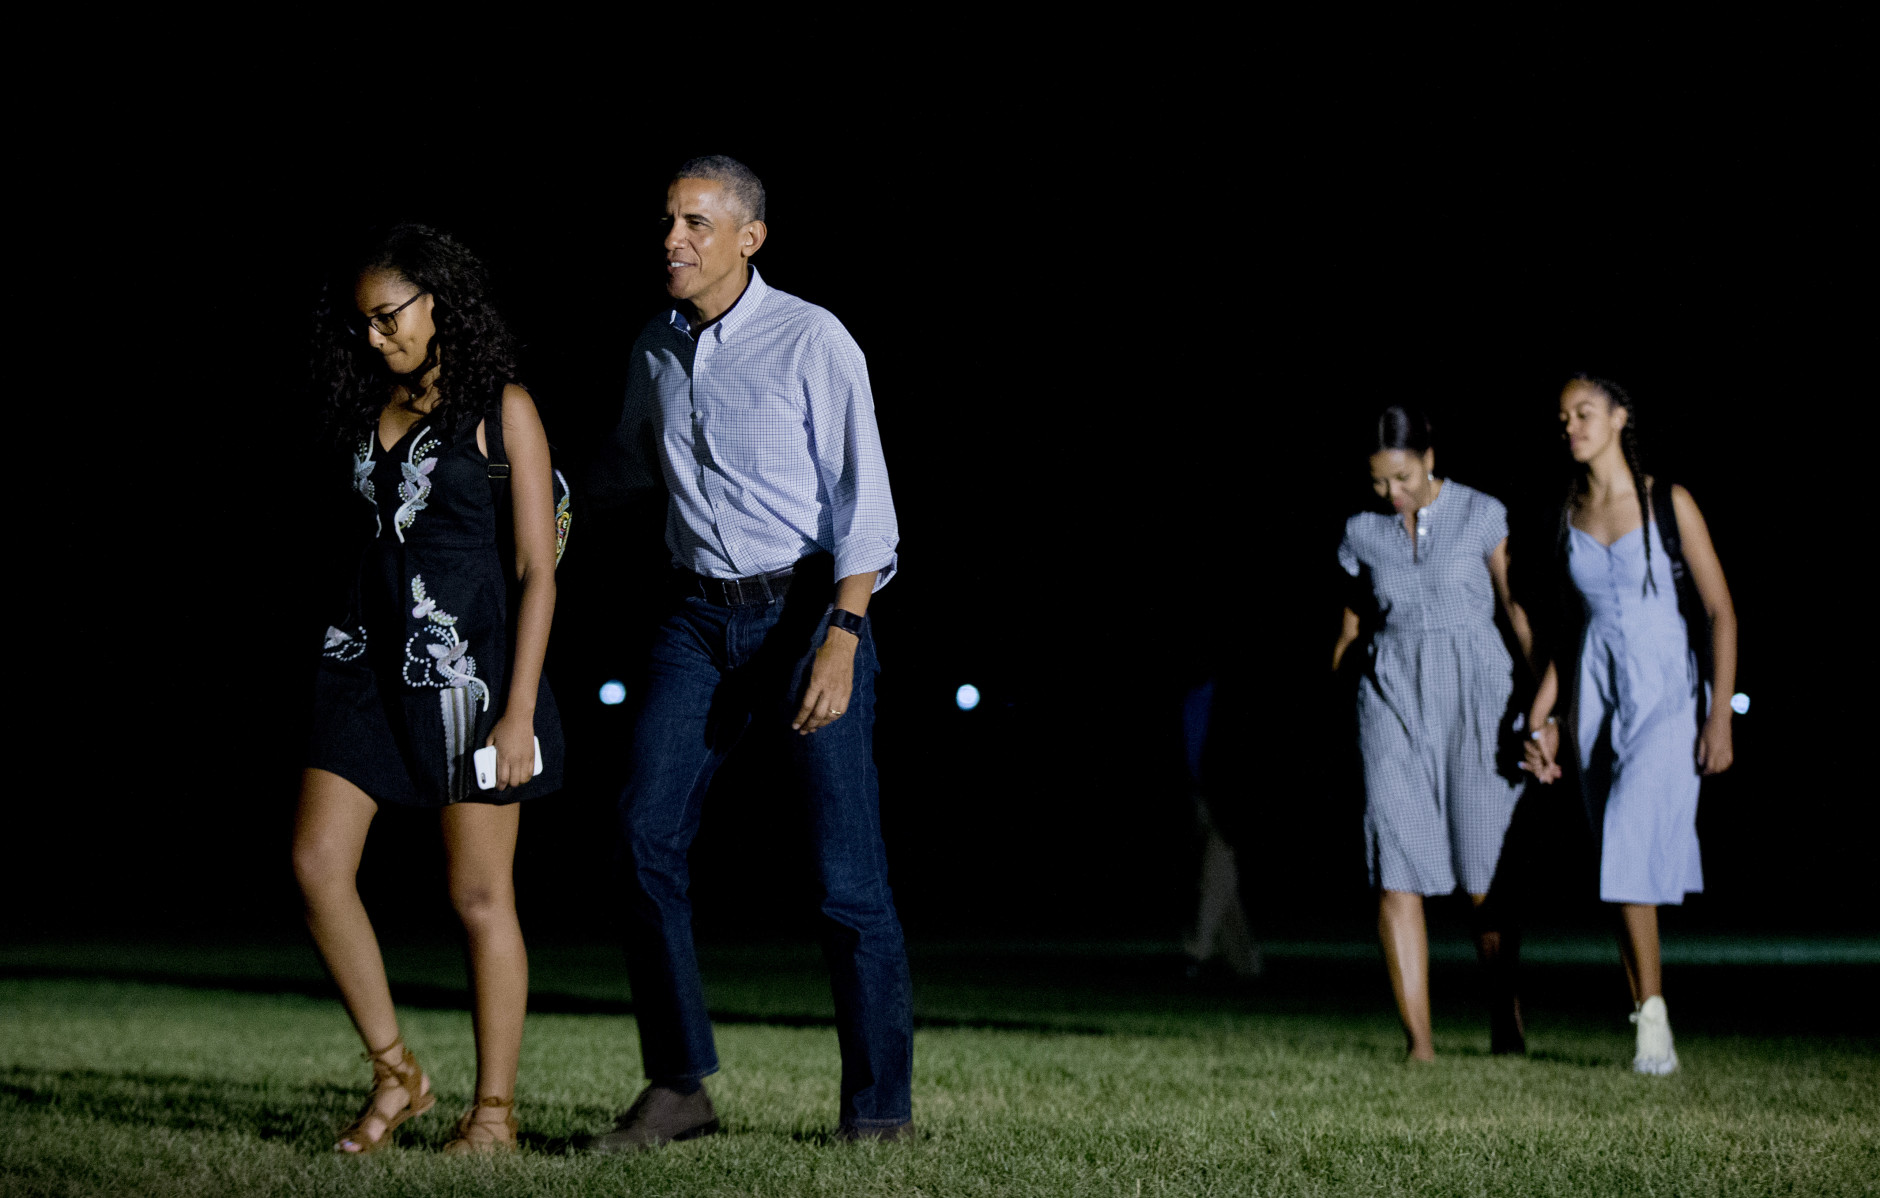 President Barack Obama, second from left, and his family, from left, Sasha Obama, first lady Michelle Obama and Malia Obama arrive at the White House in Washington, Sunday, June 19, 2016, from a trip to California, where he visited the Yosemite National Park to celebrate 100th anniversary of the creation of America's national park system.(AP Photo/Manuel Balce Ceneta)